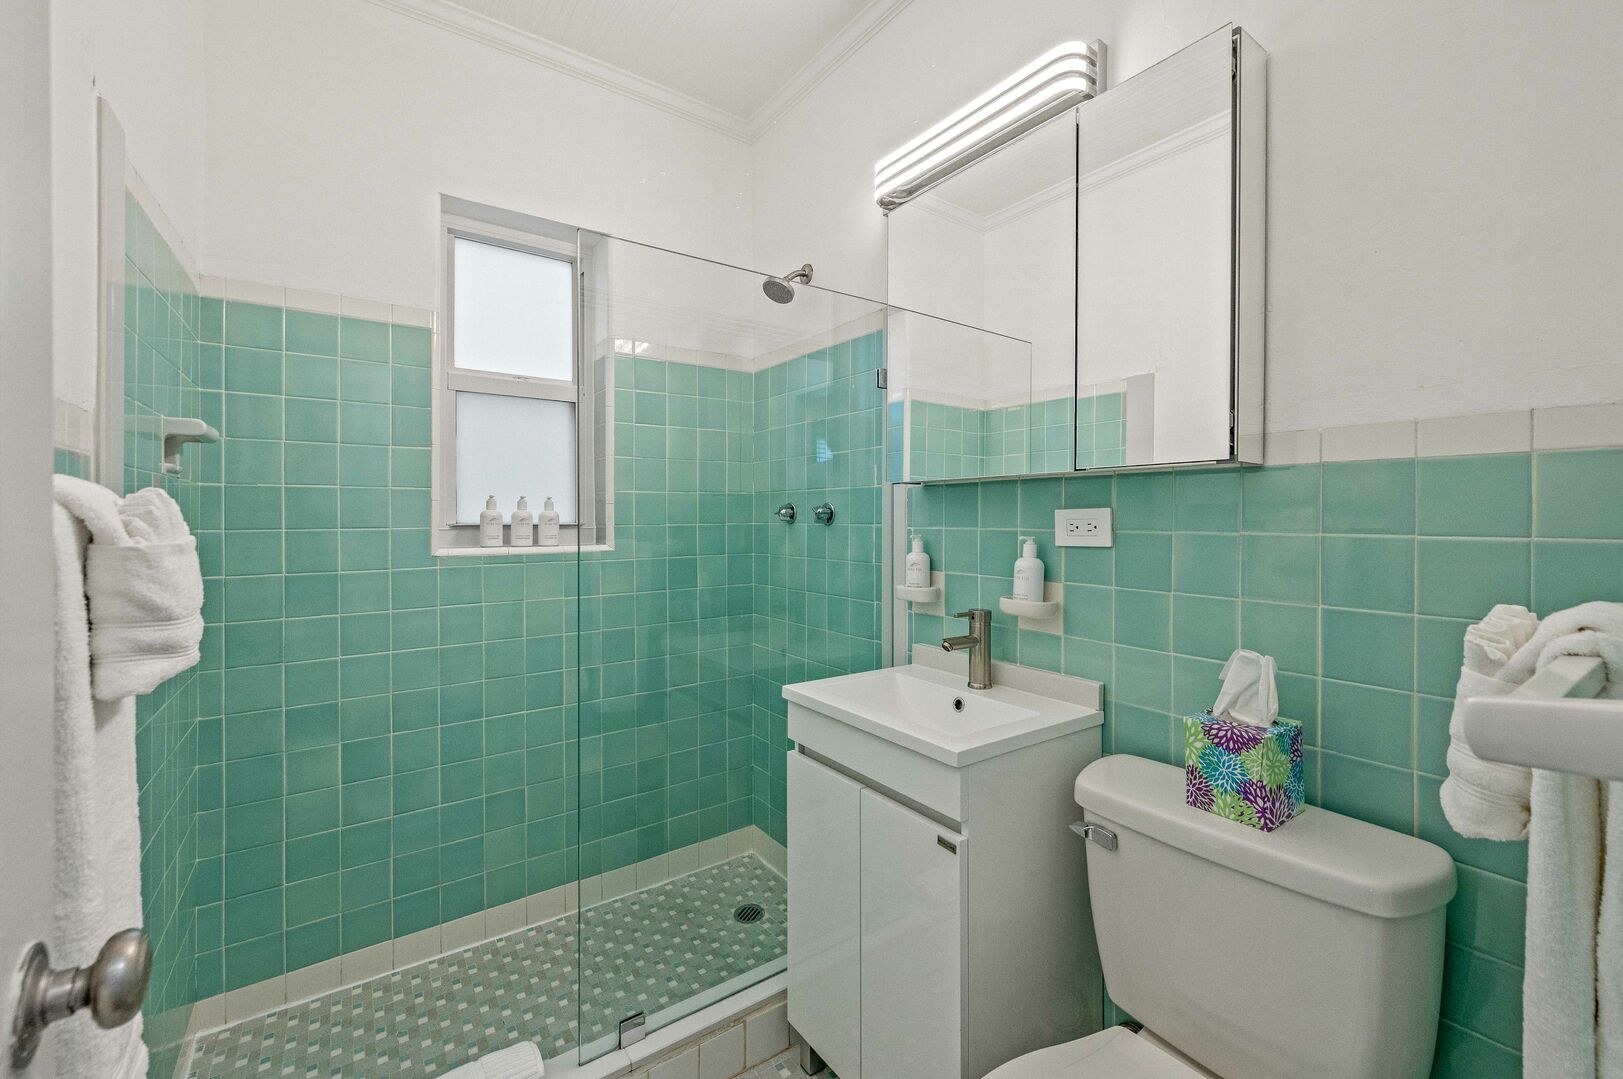 The bathroom features a walk-in shower.